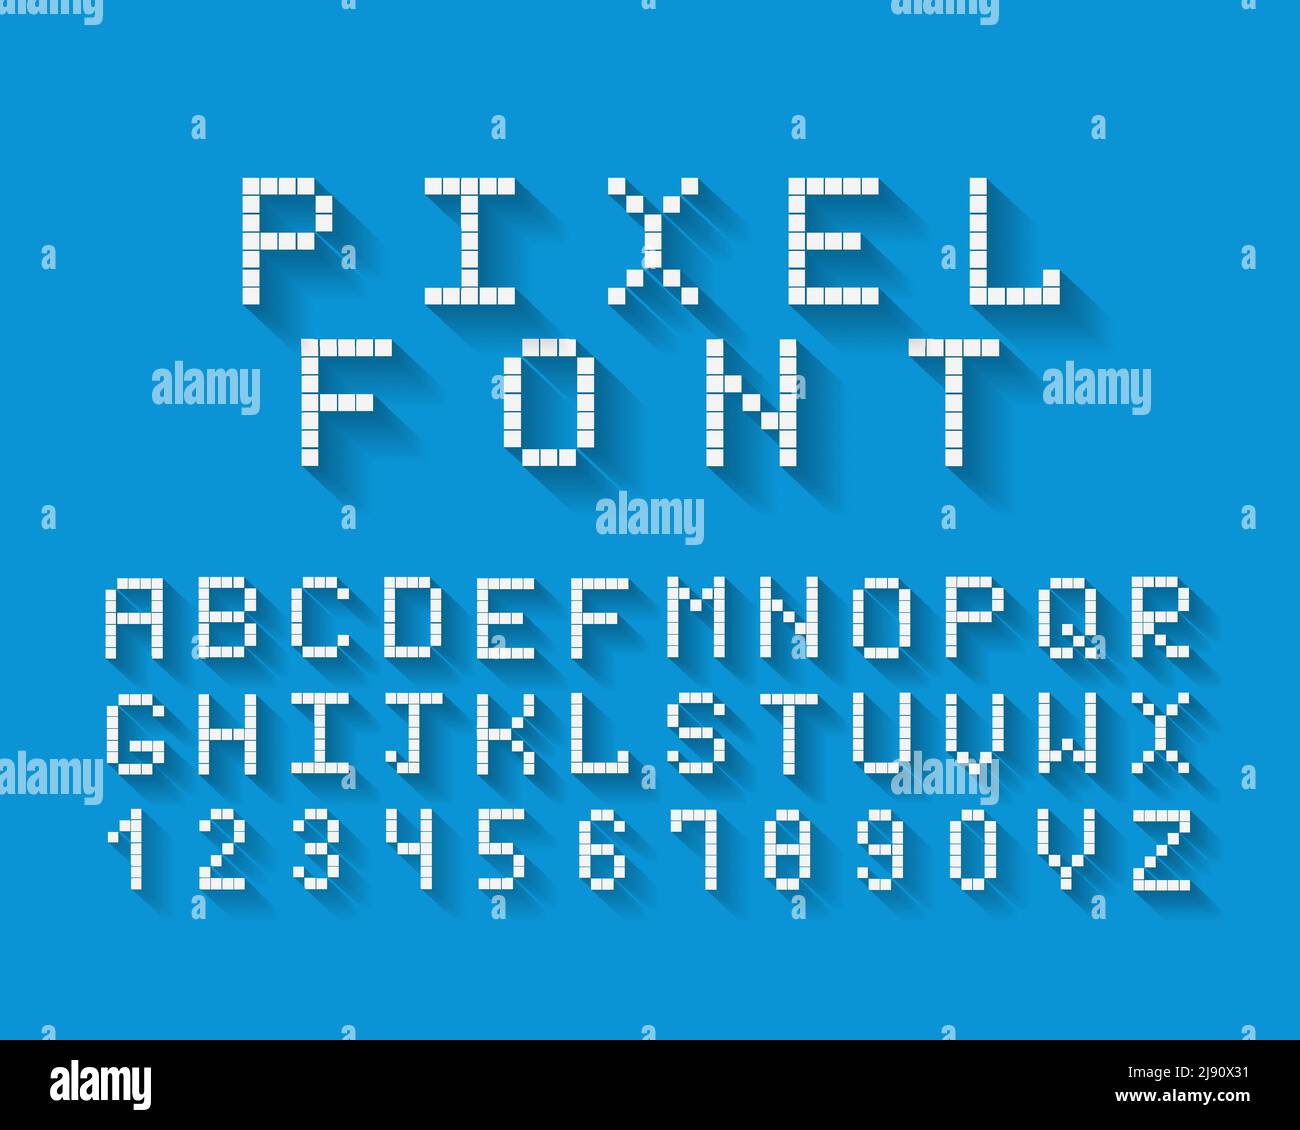 Pixel vector font with a complete set of uppercase alphabetical letters and the numbers 0 through 9 on a blue background Stock Vector